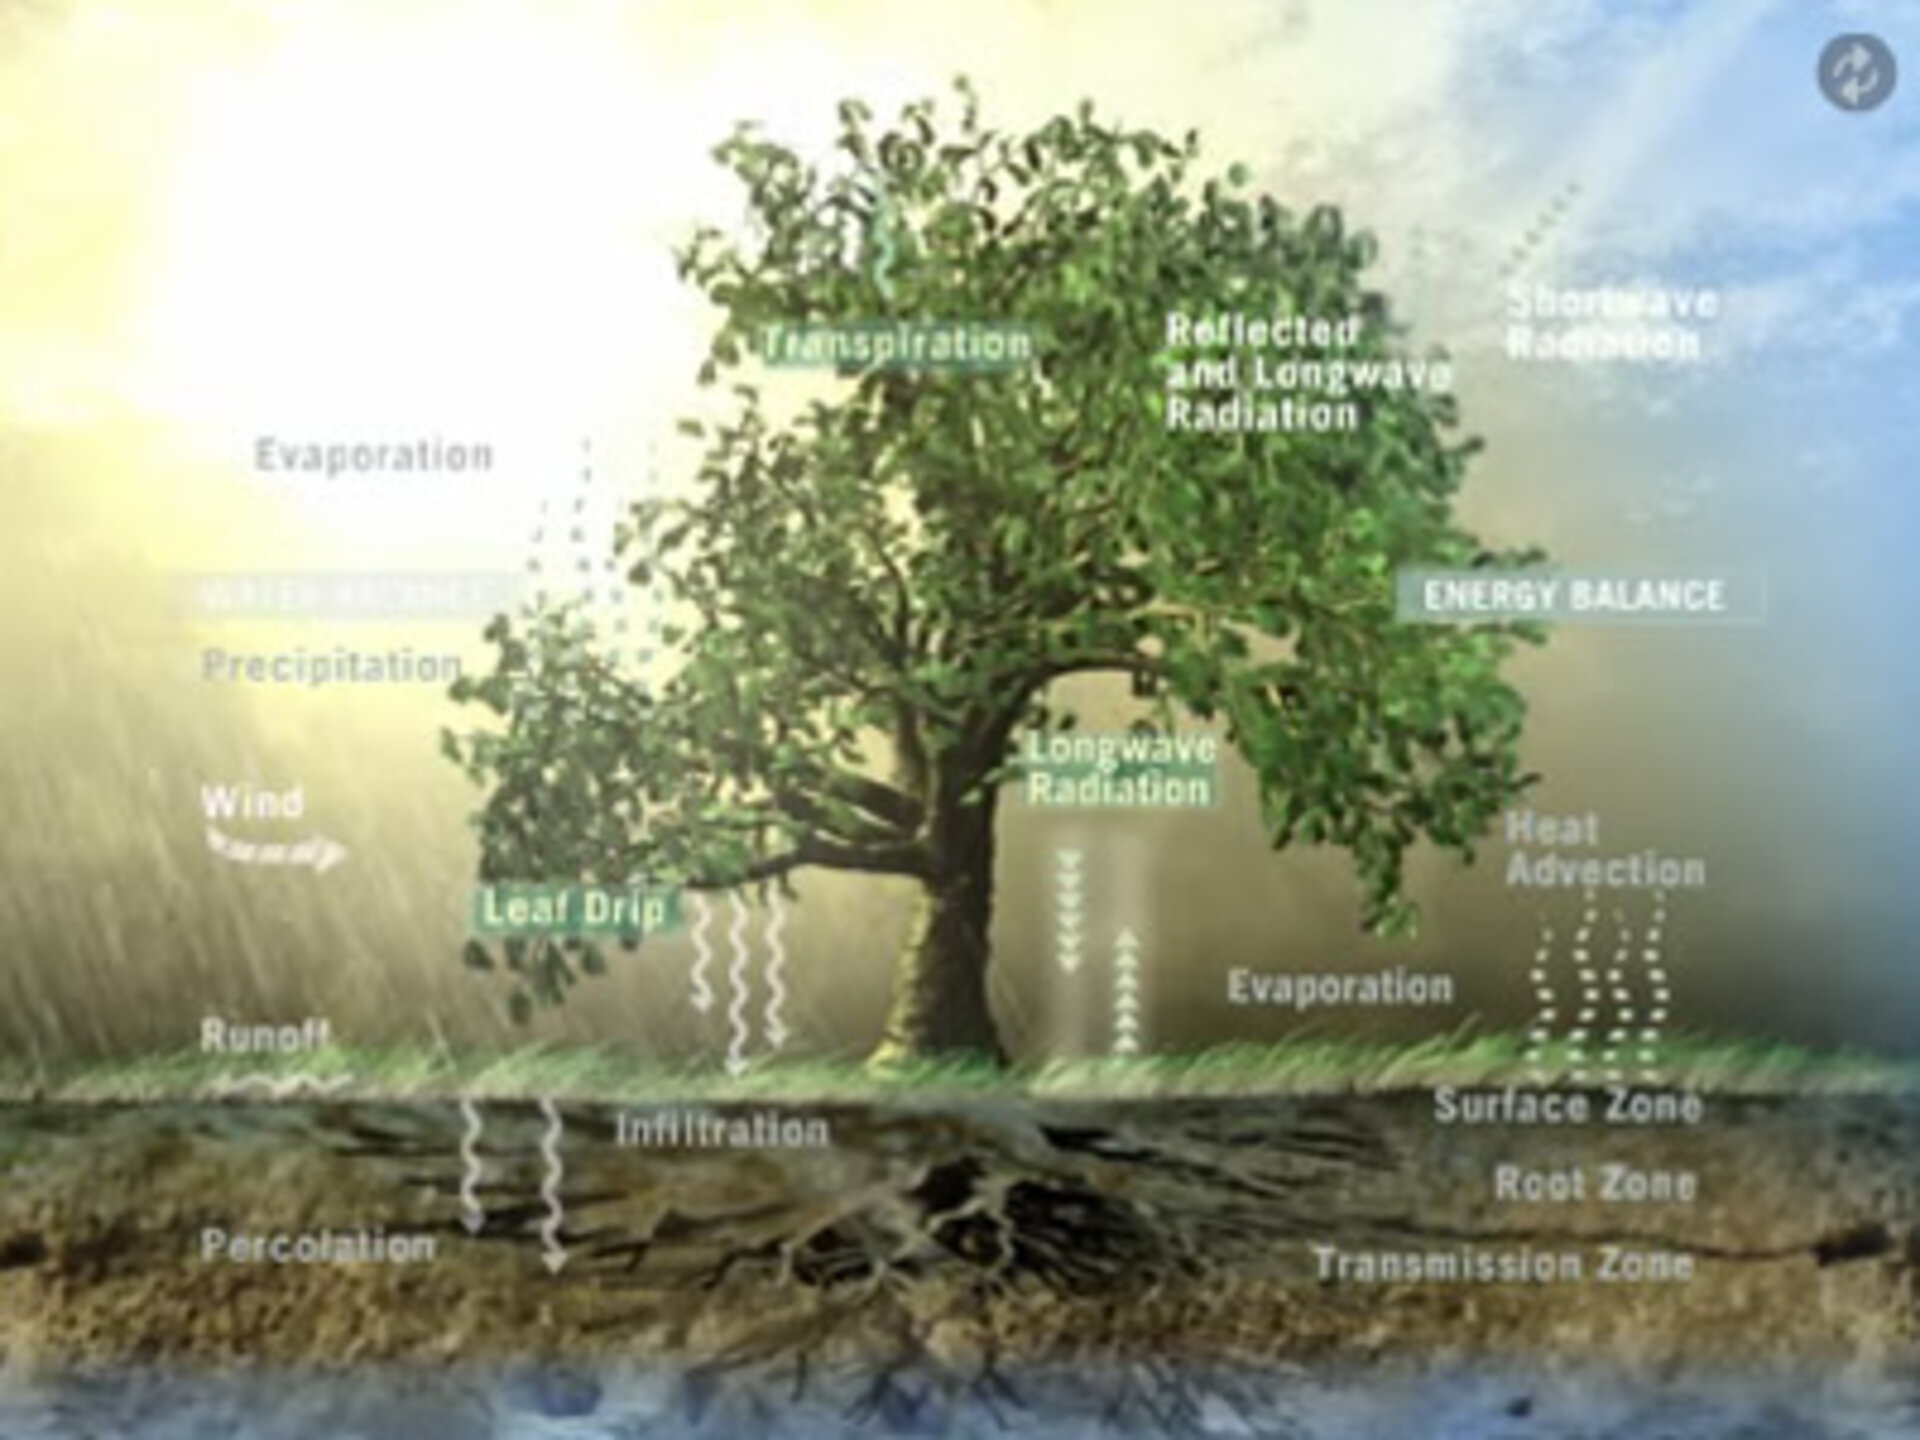 Terrestrial and atmospheric components of the water cycle